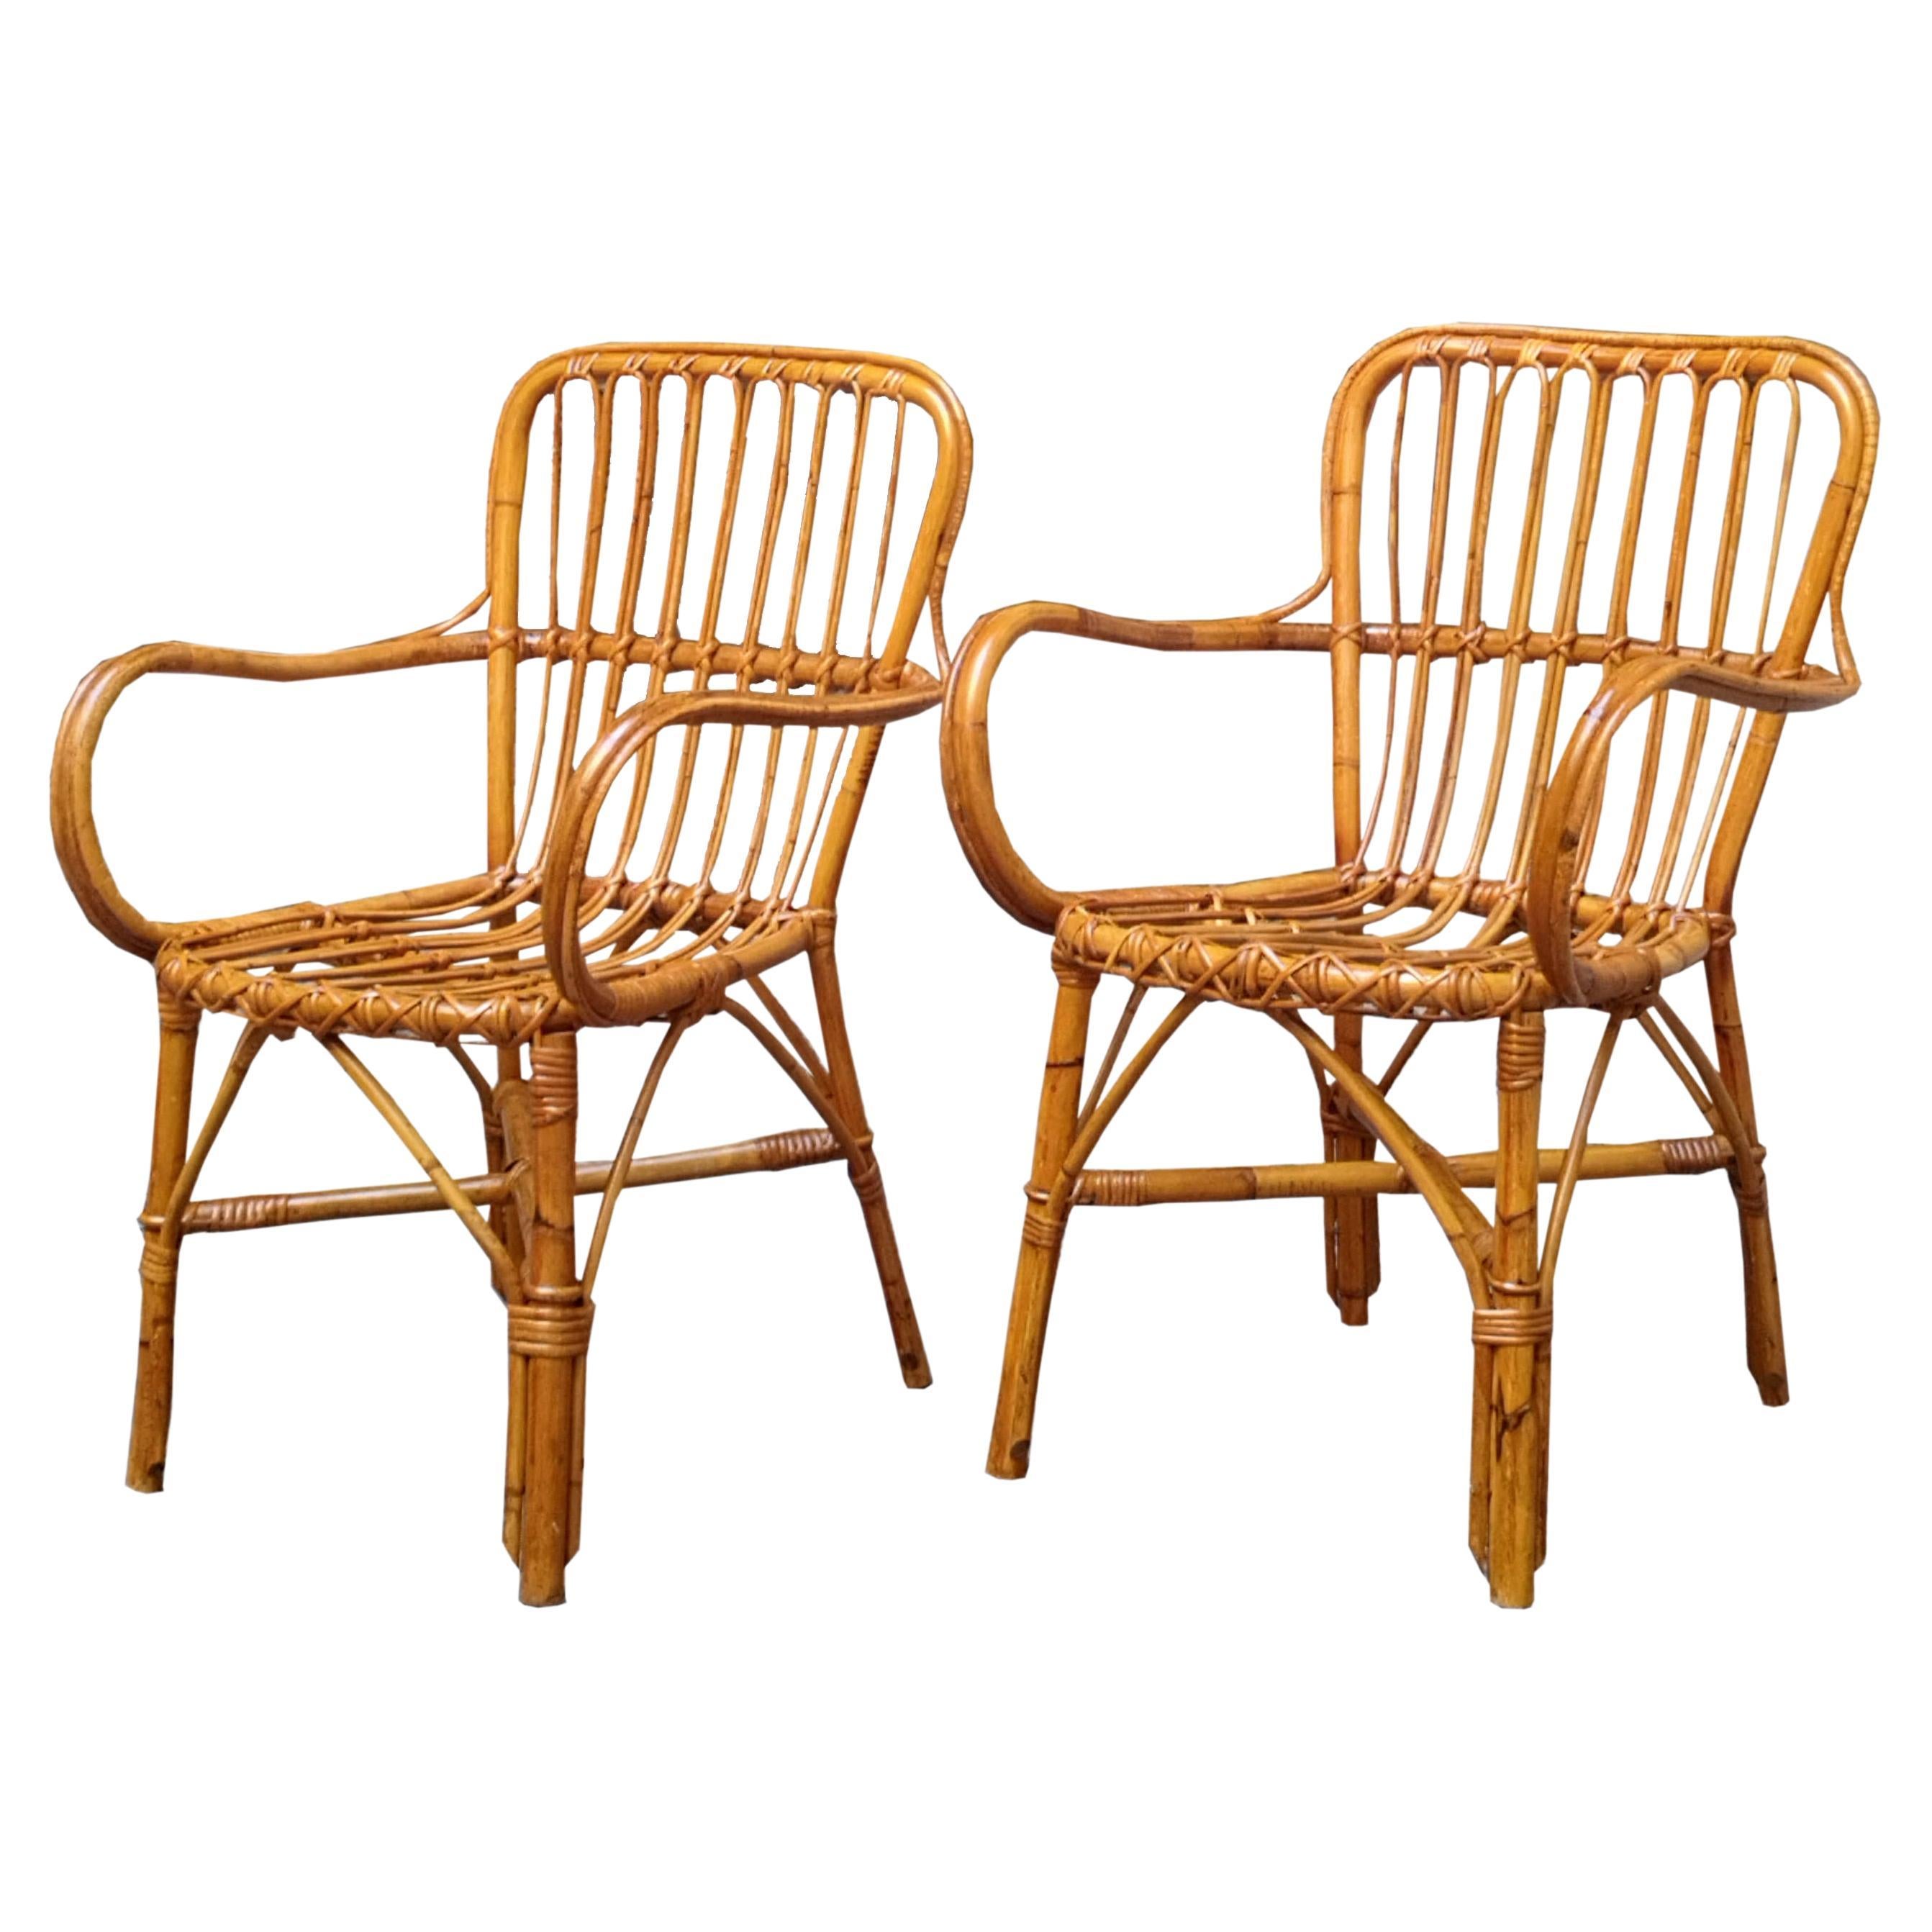 Pair of Rattan Italian Armchairs, 1960s For Sale